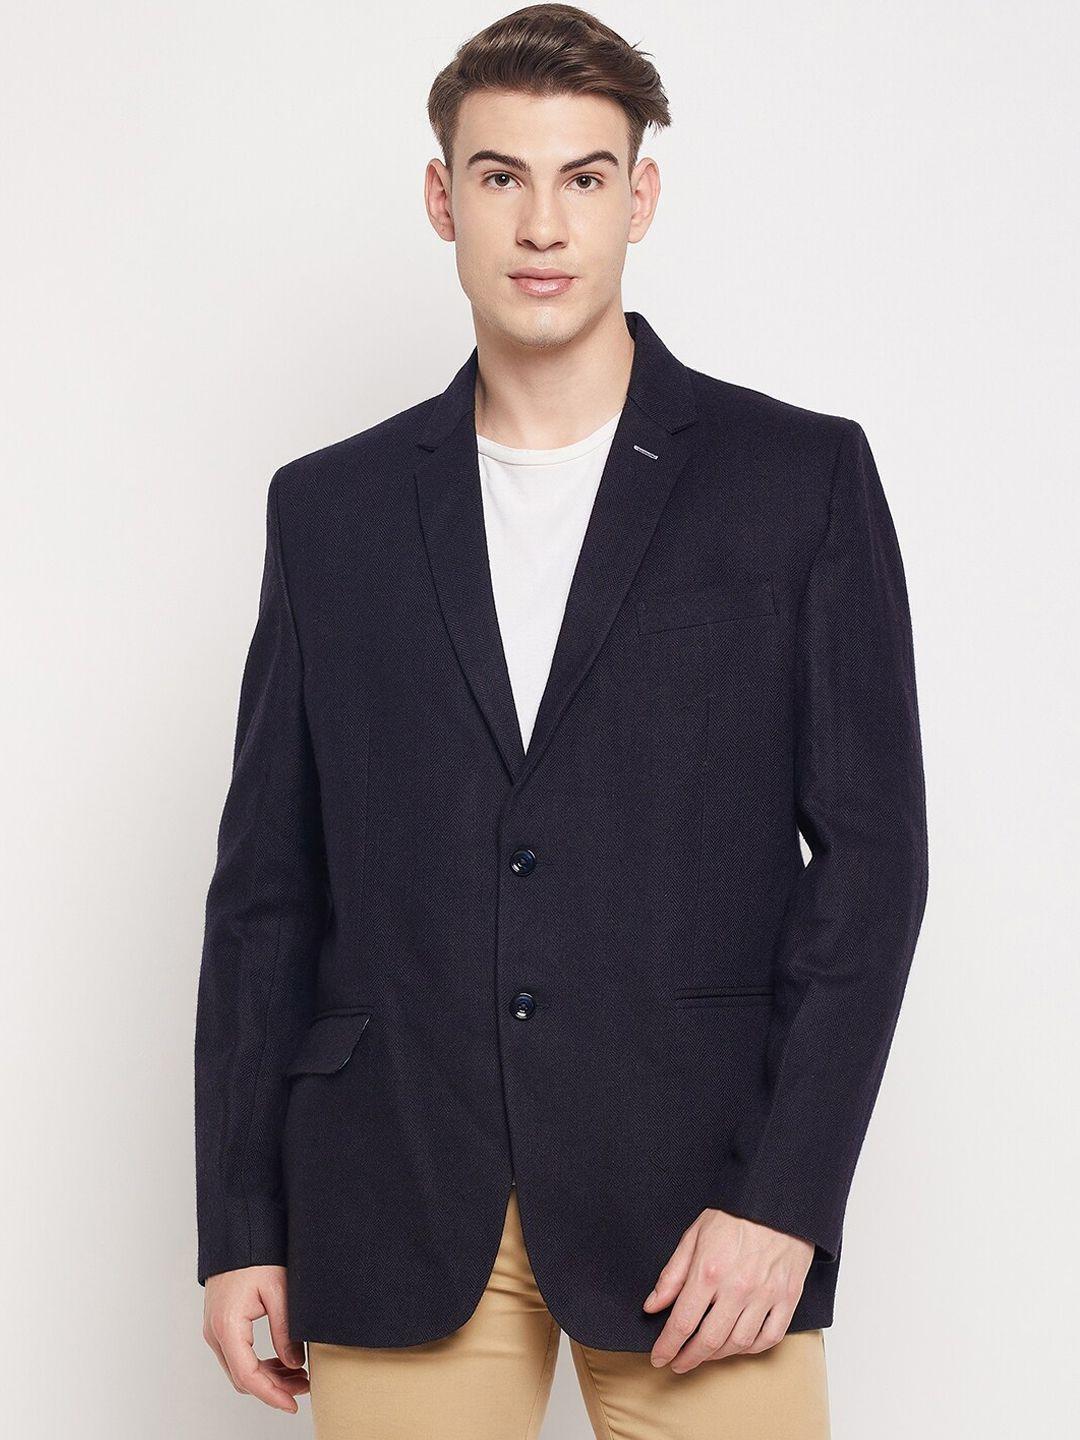 duke-men-navy-blue-solid-single-breasted-casual-blazers